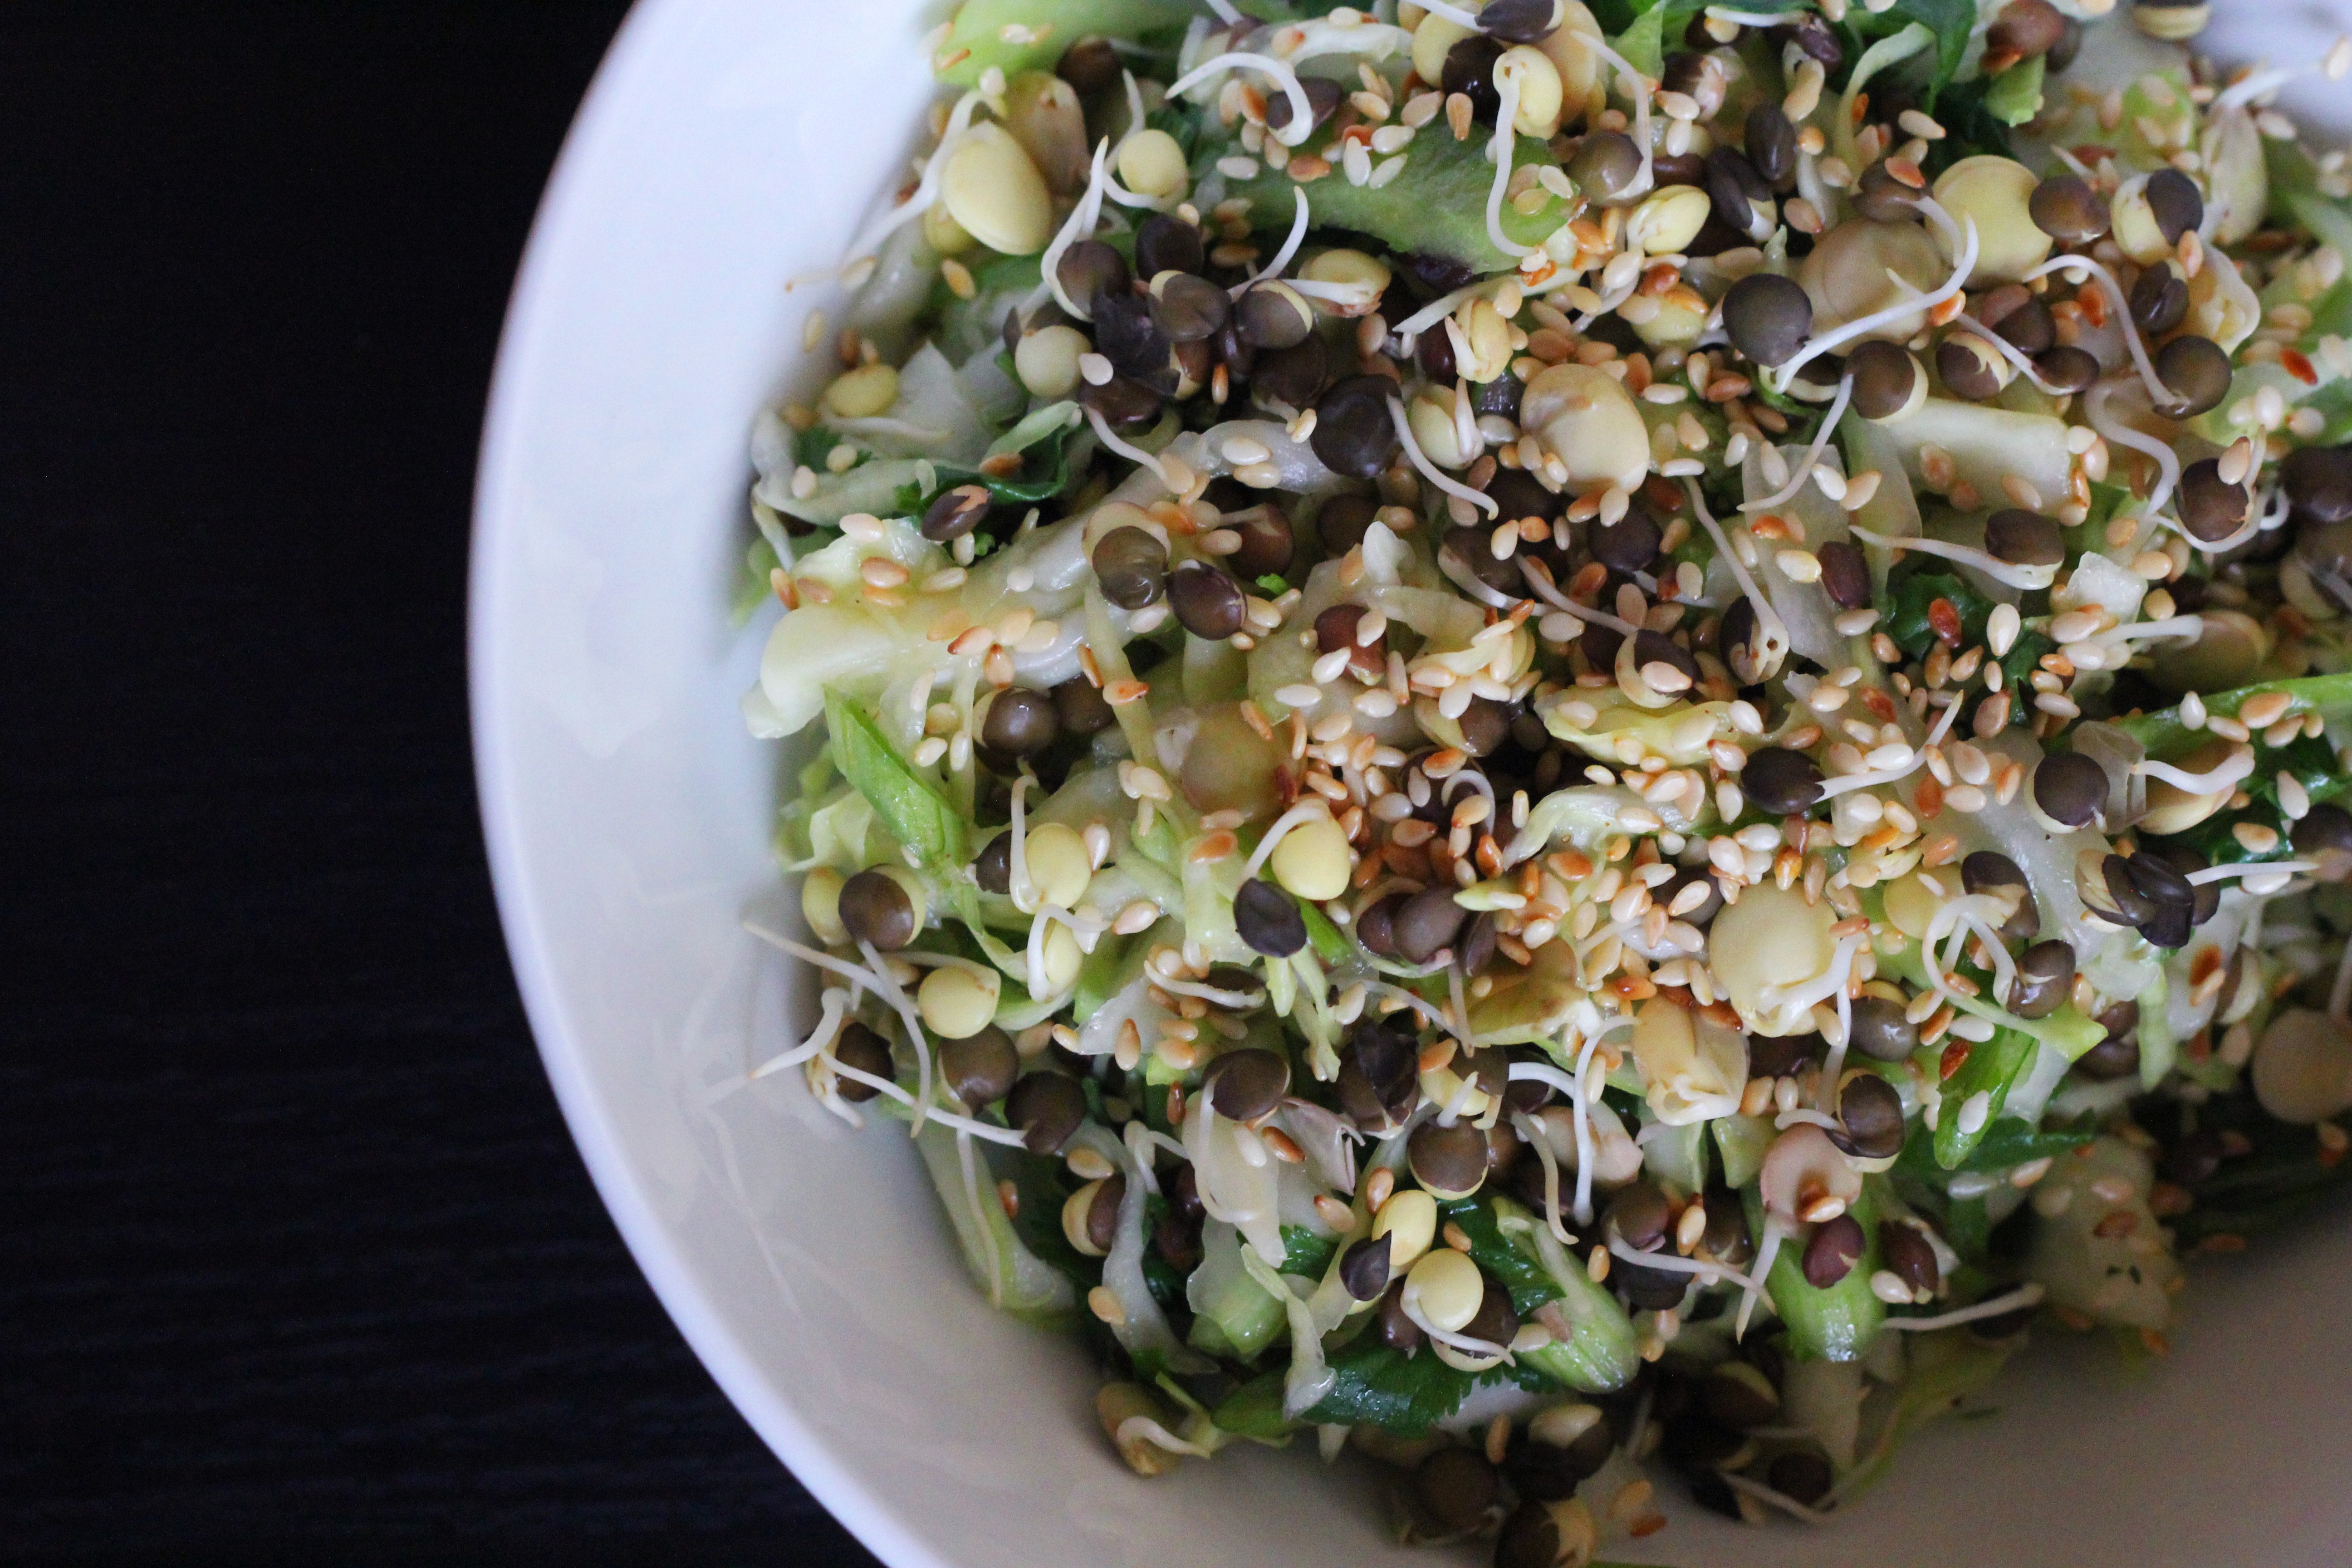 Slaw made with cabbage, sprouted lentils, celery, and a tangy dressing